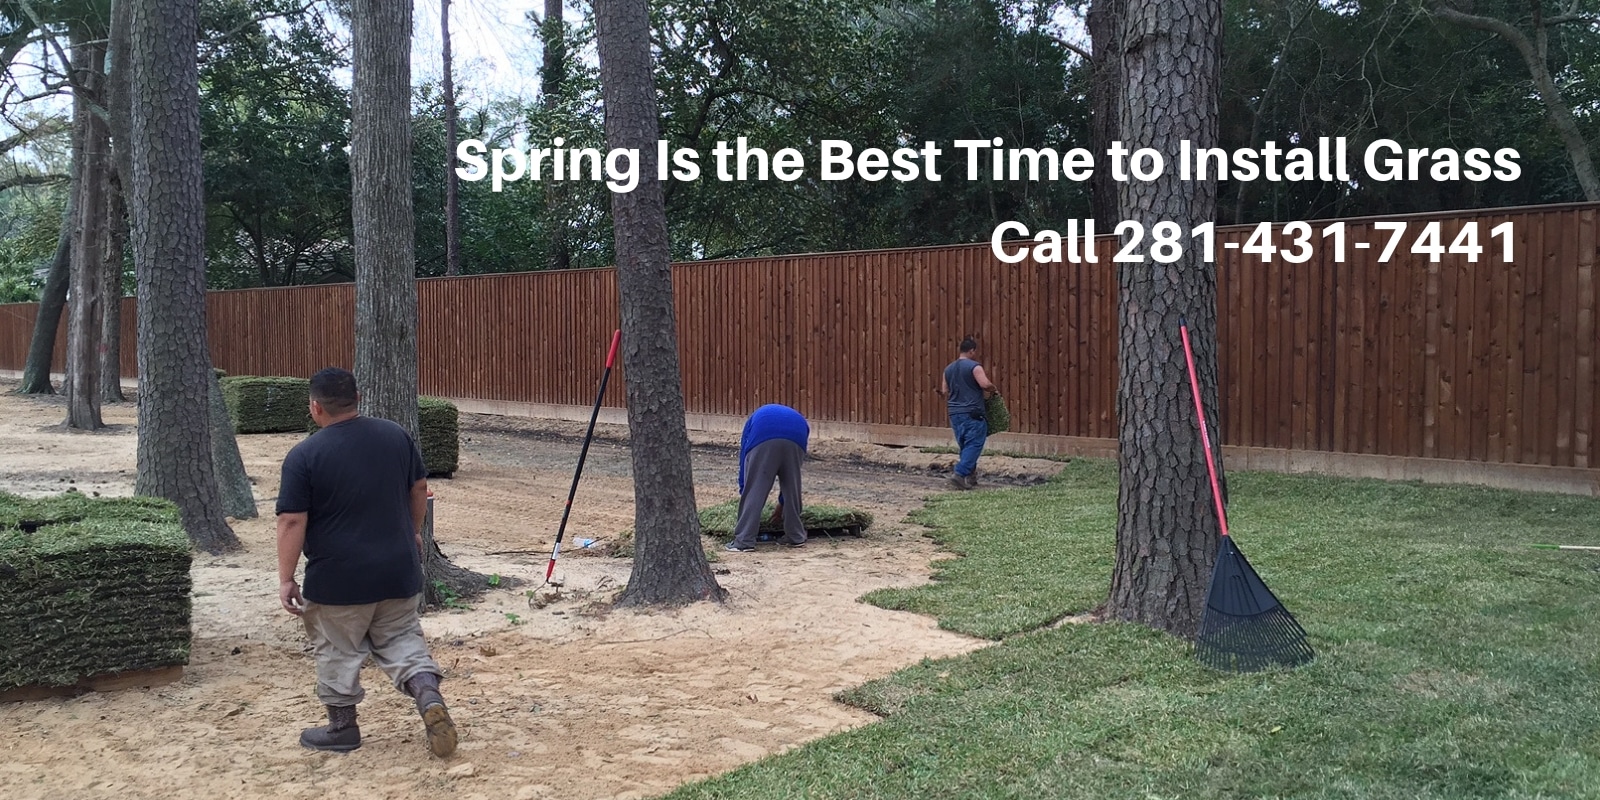 Spring is the Best Time to Install Grass Call 281-431-7441